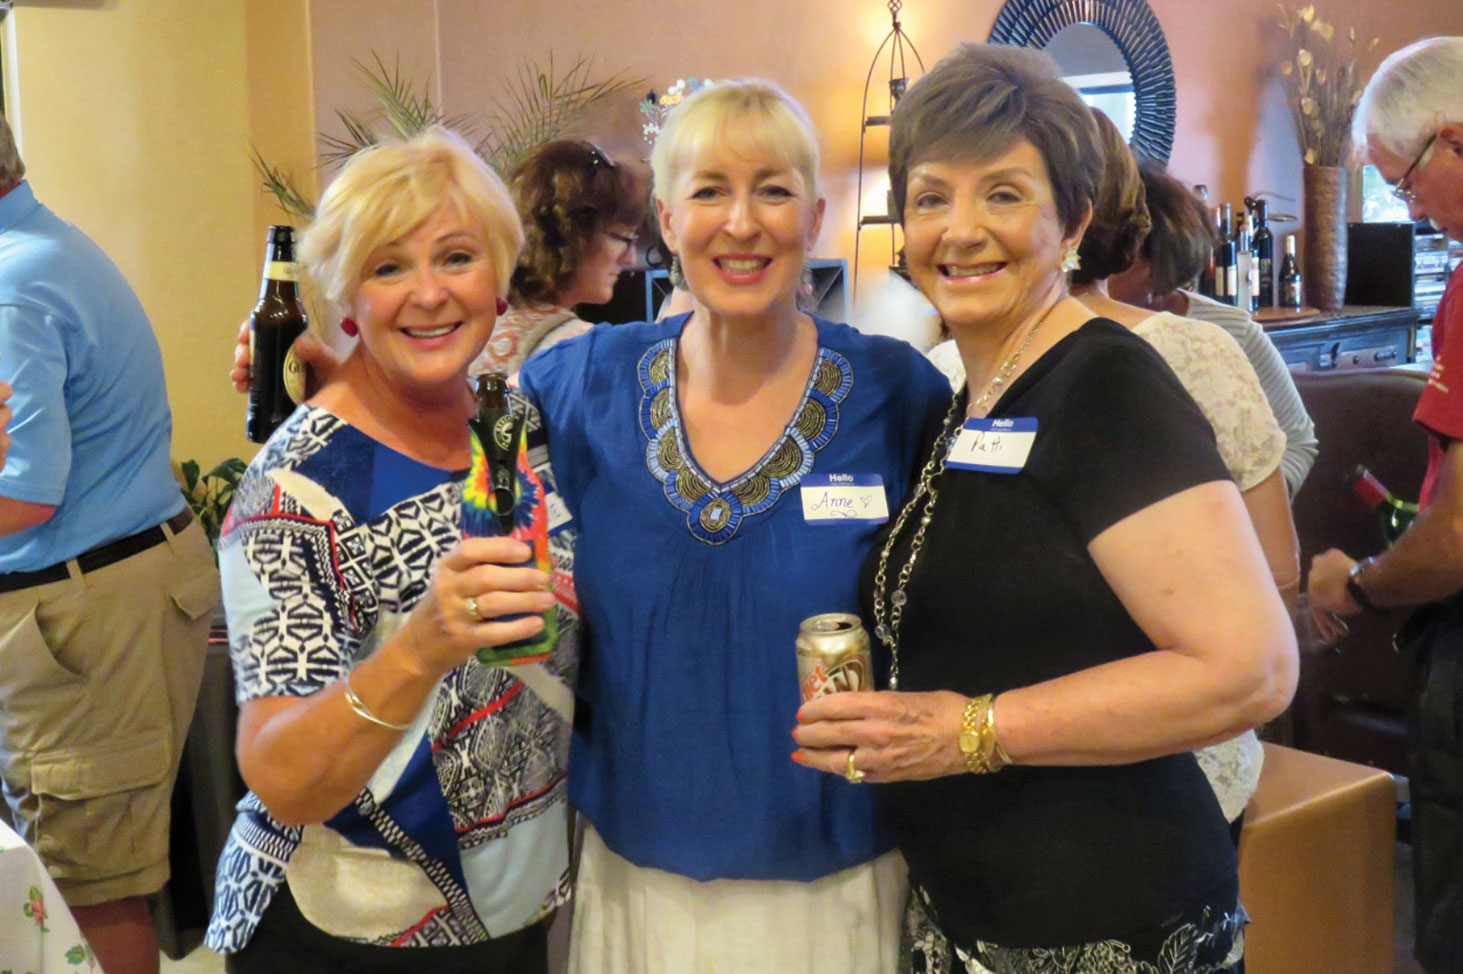 Janie, Anne and Patti at August 2016 Snack and Chat; photo by Ron Talbot.